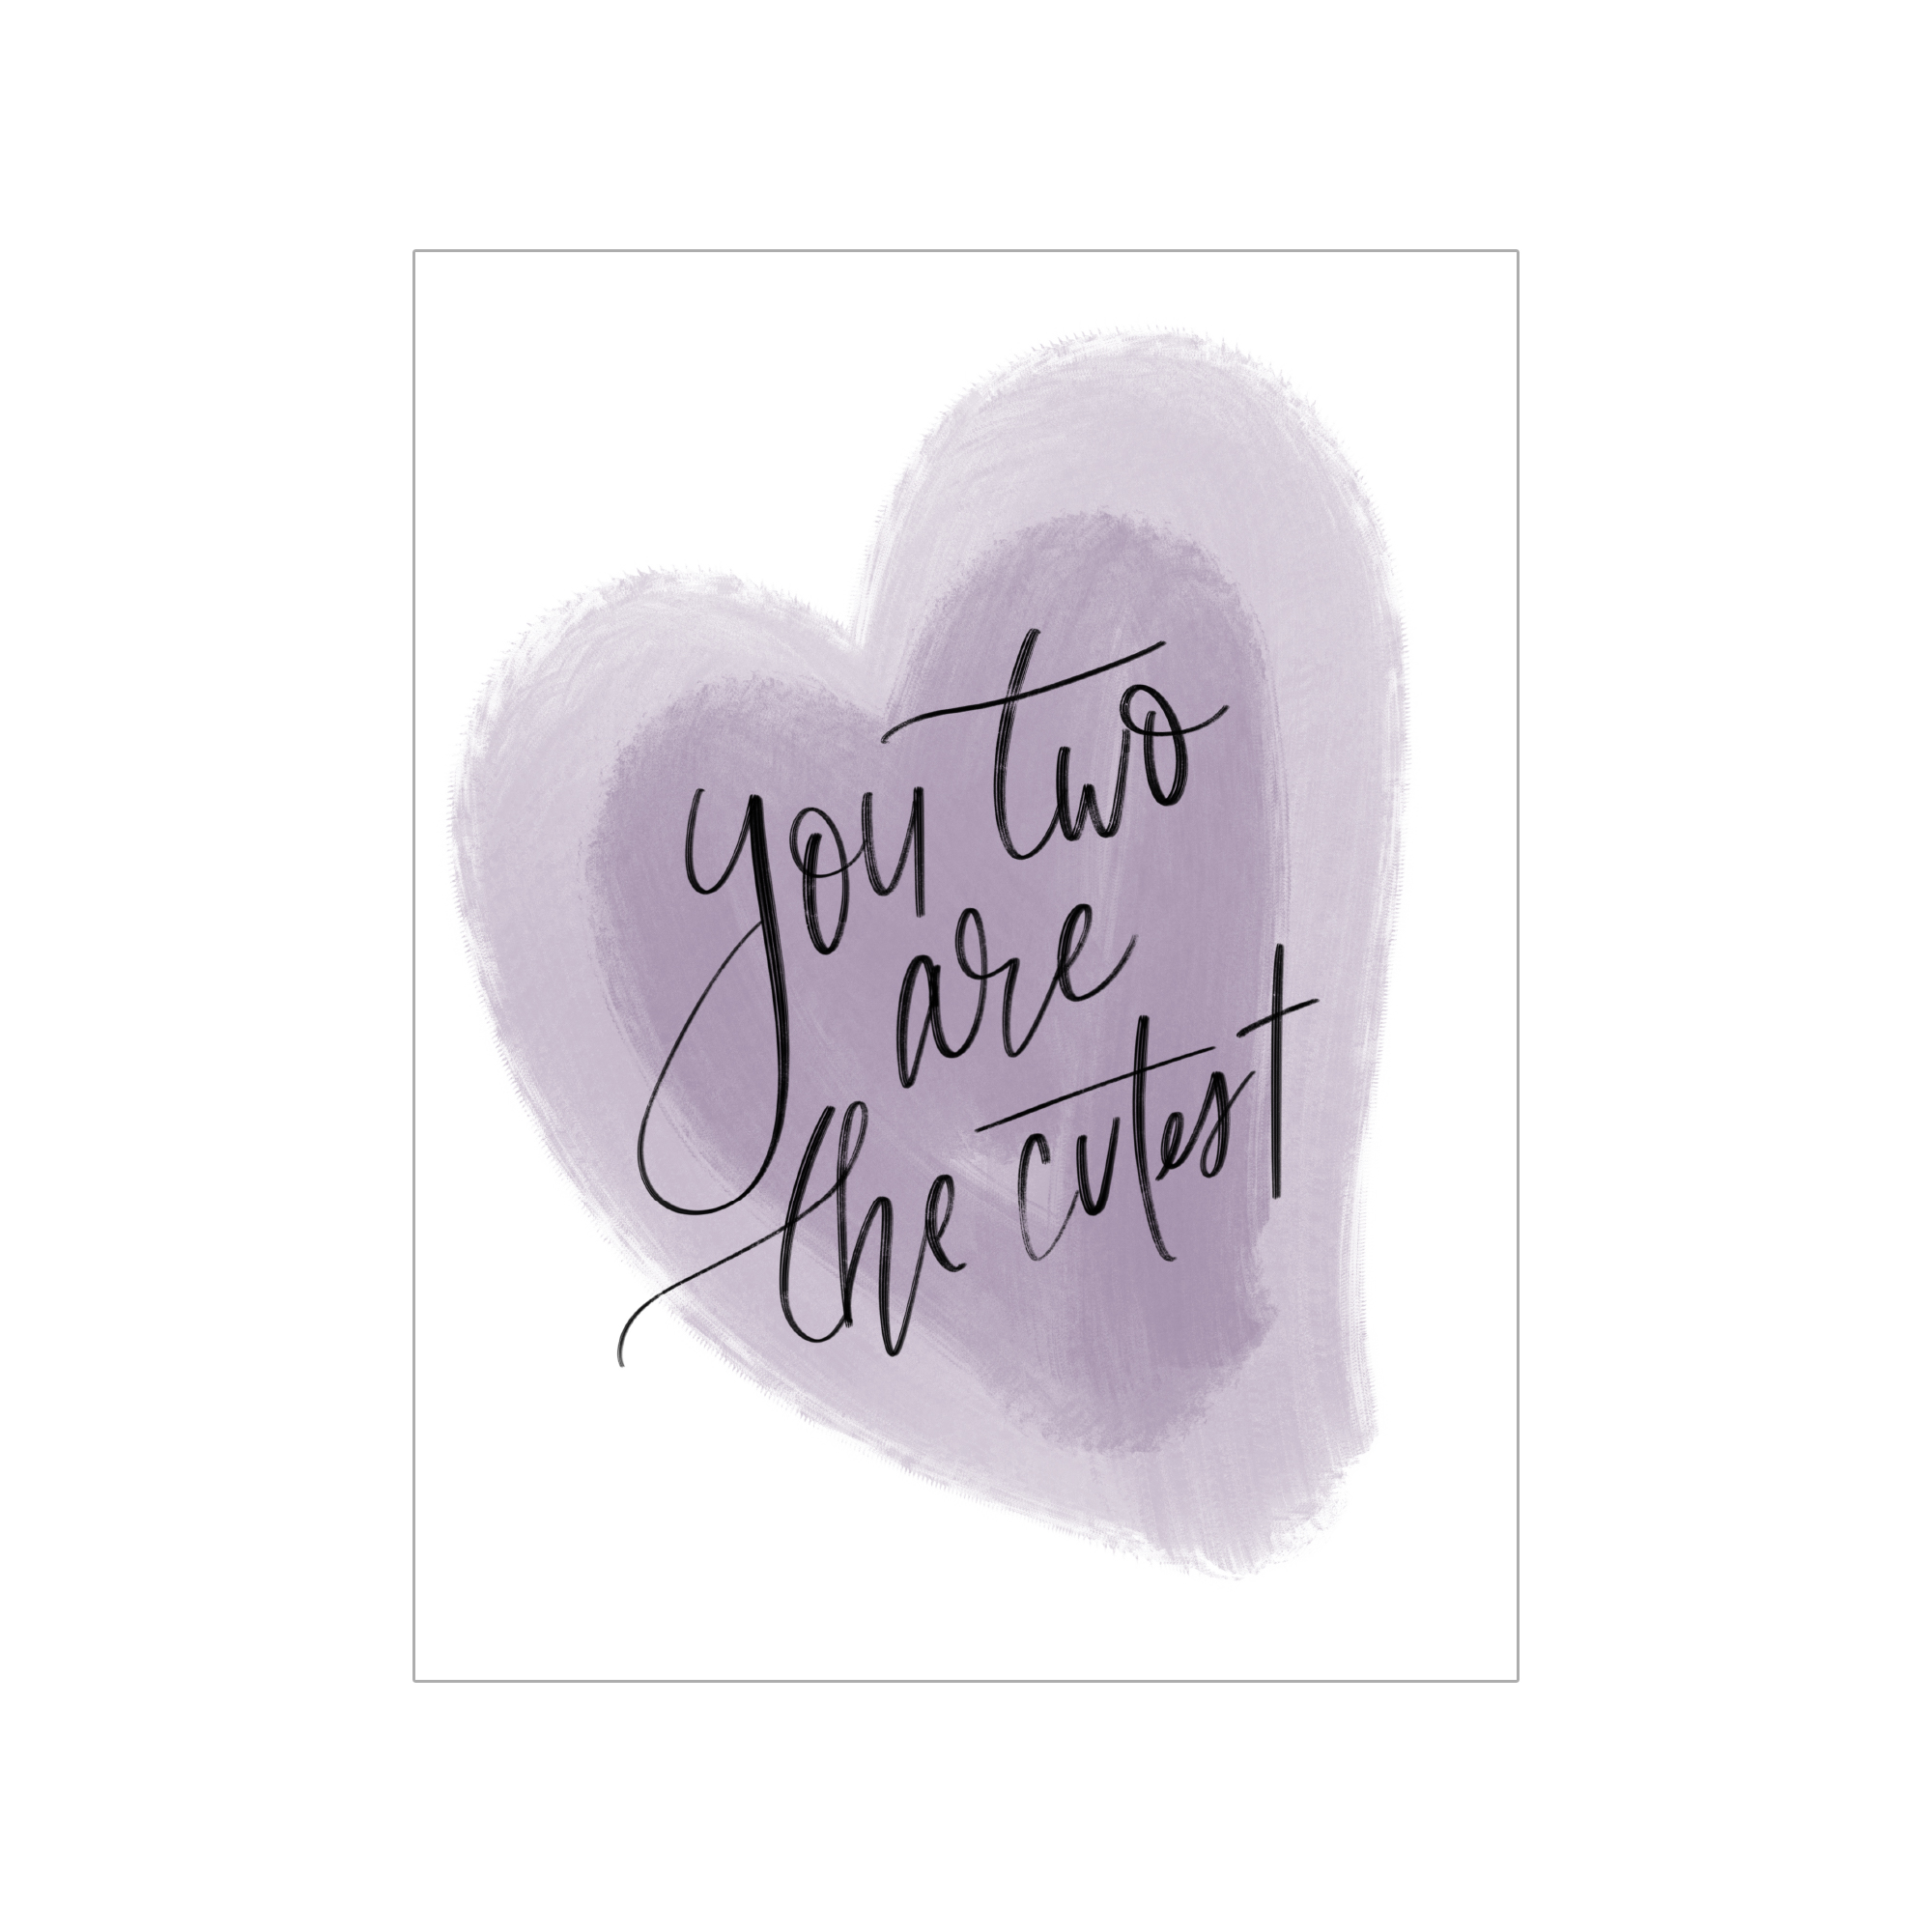 Greeting card; white and lavender watercolour background with black handwritten text, "you two are the cutest"